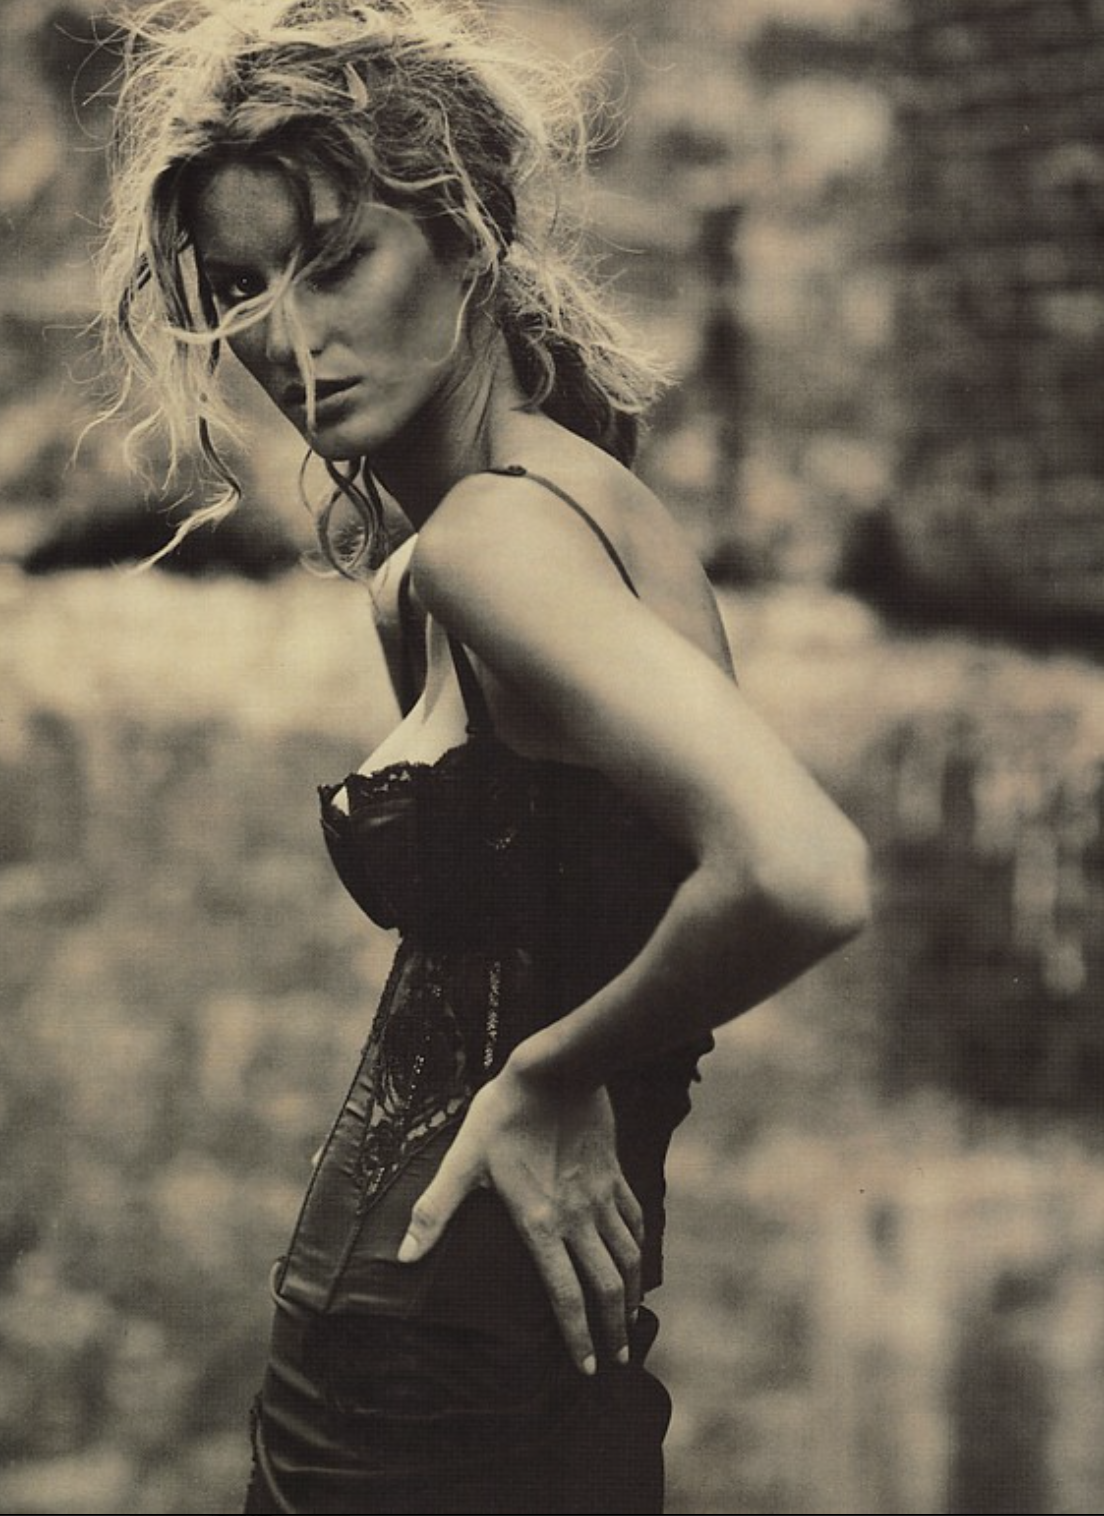 Gisele-Bundchen-by-Paolo-Roversi-Vogue-Italia-February-2002-3.png